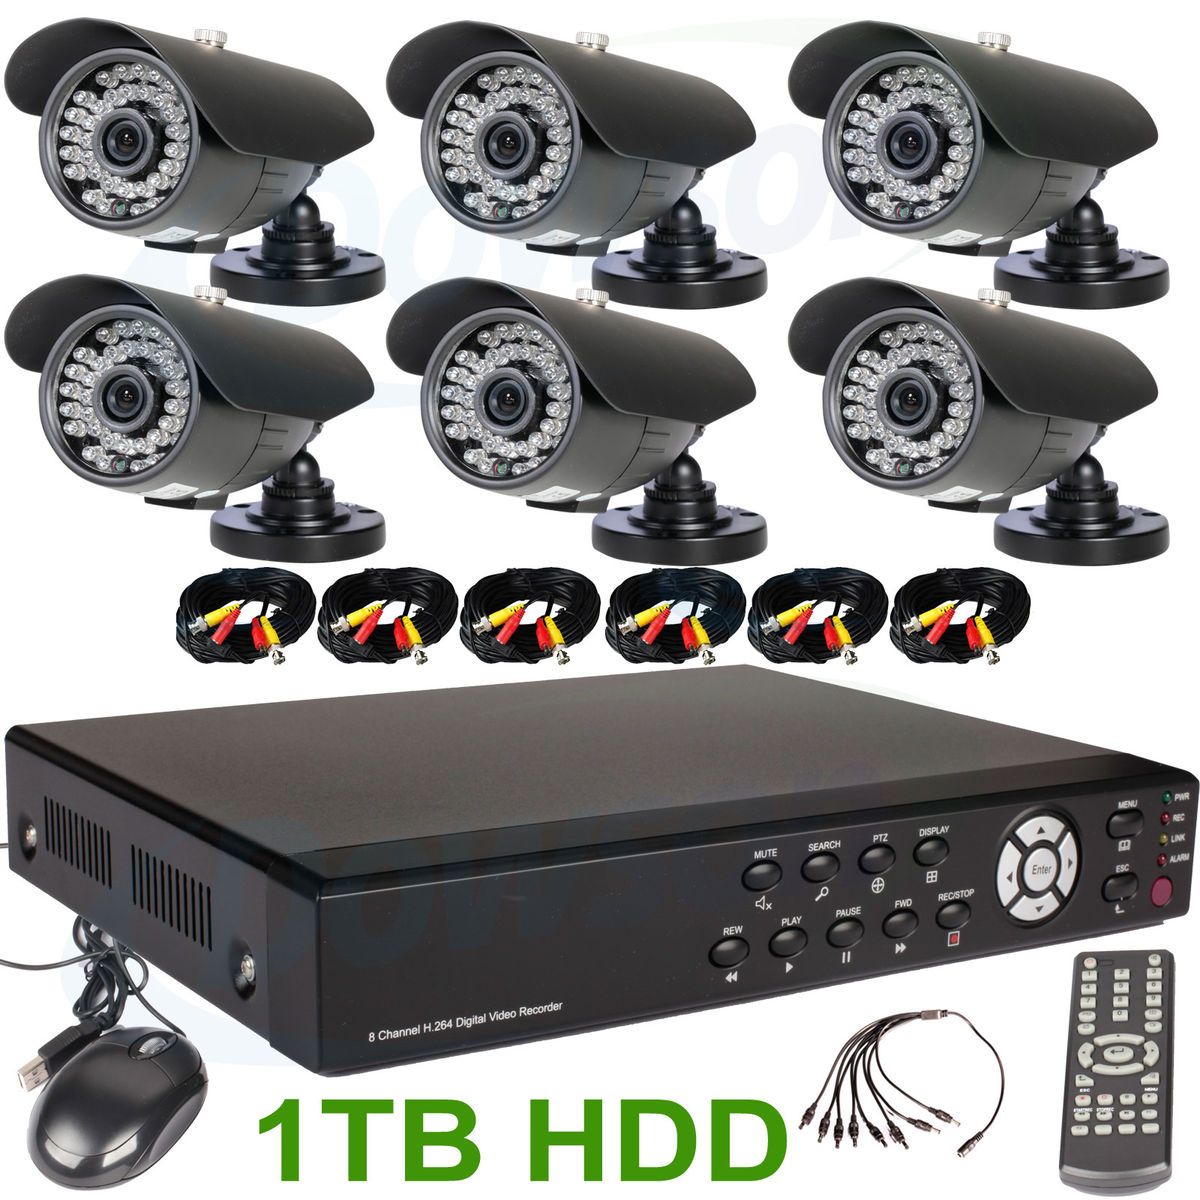   CCD Cameras 8 Channel H 264 1TB HDD Security DVR CCTV System